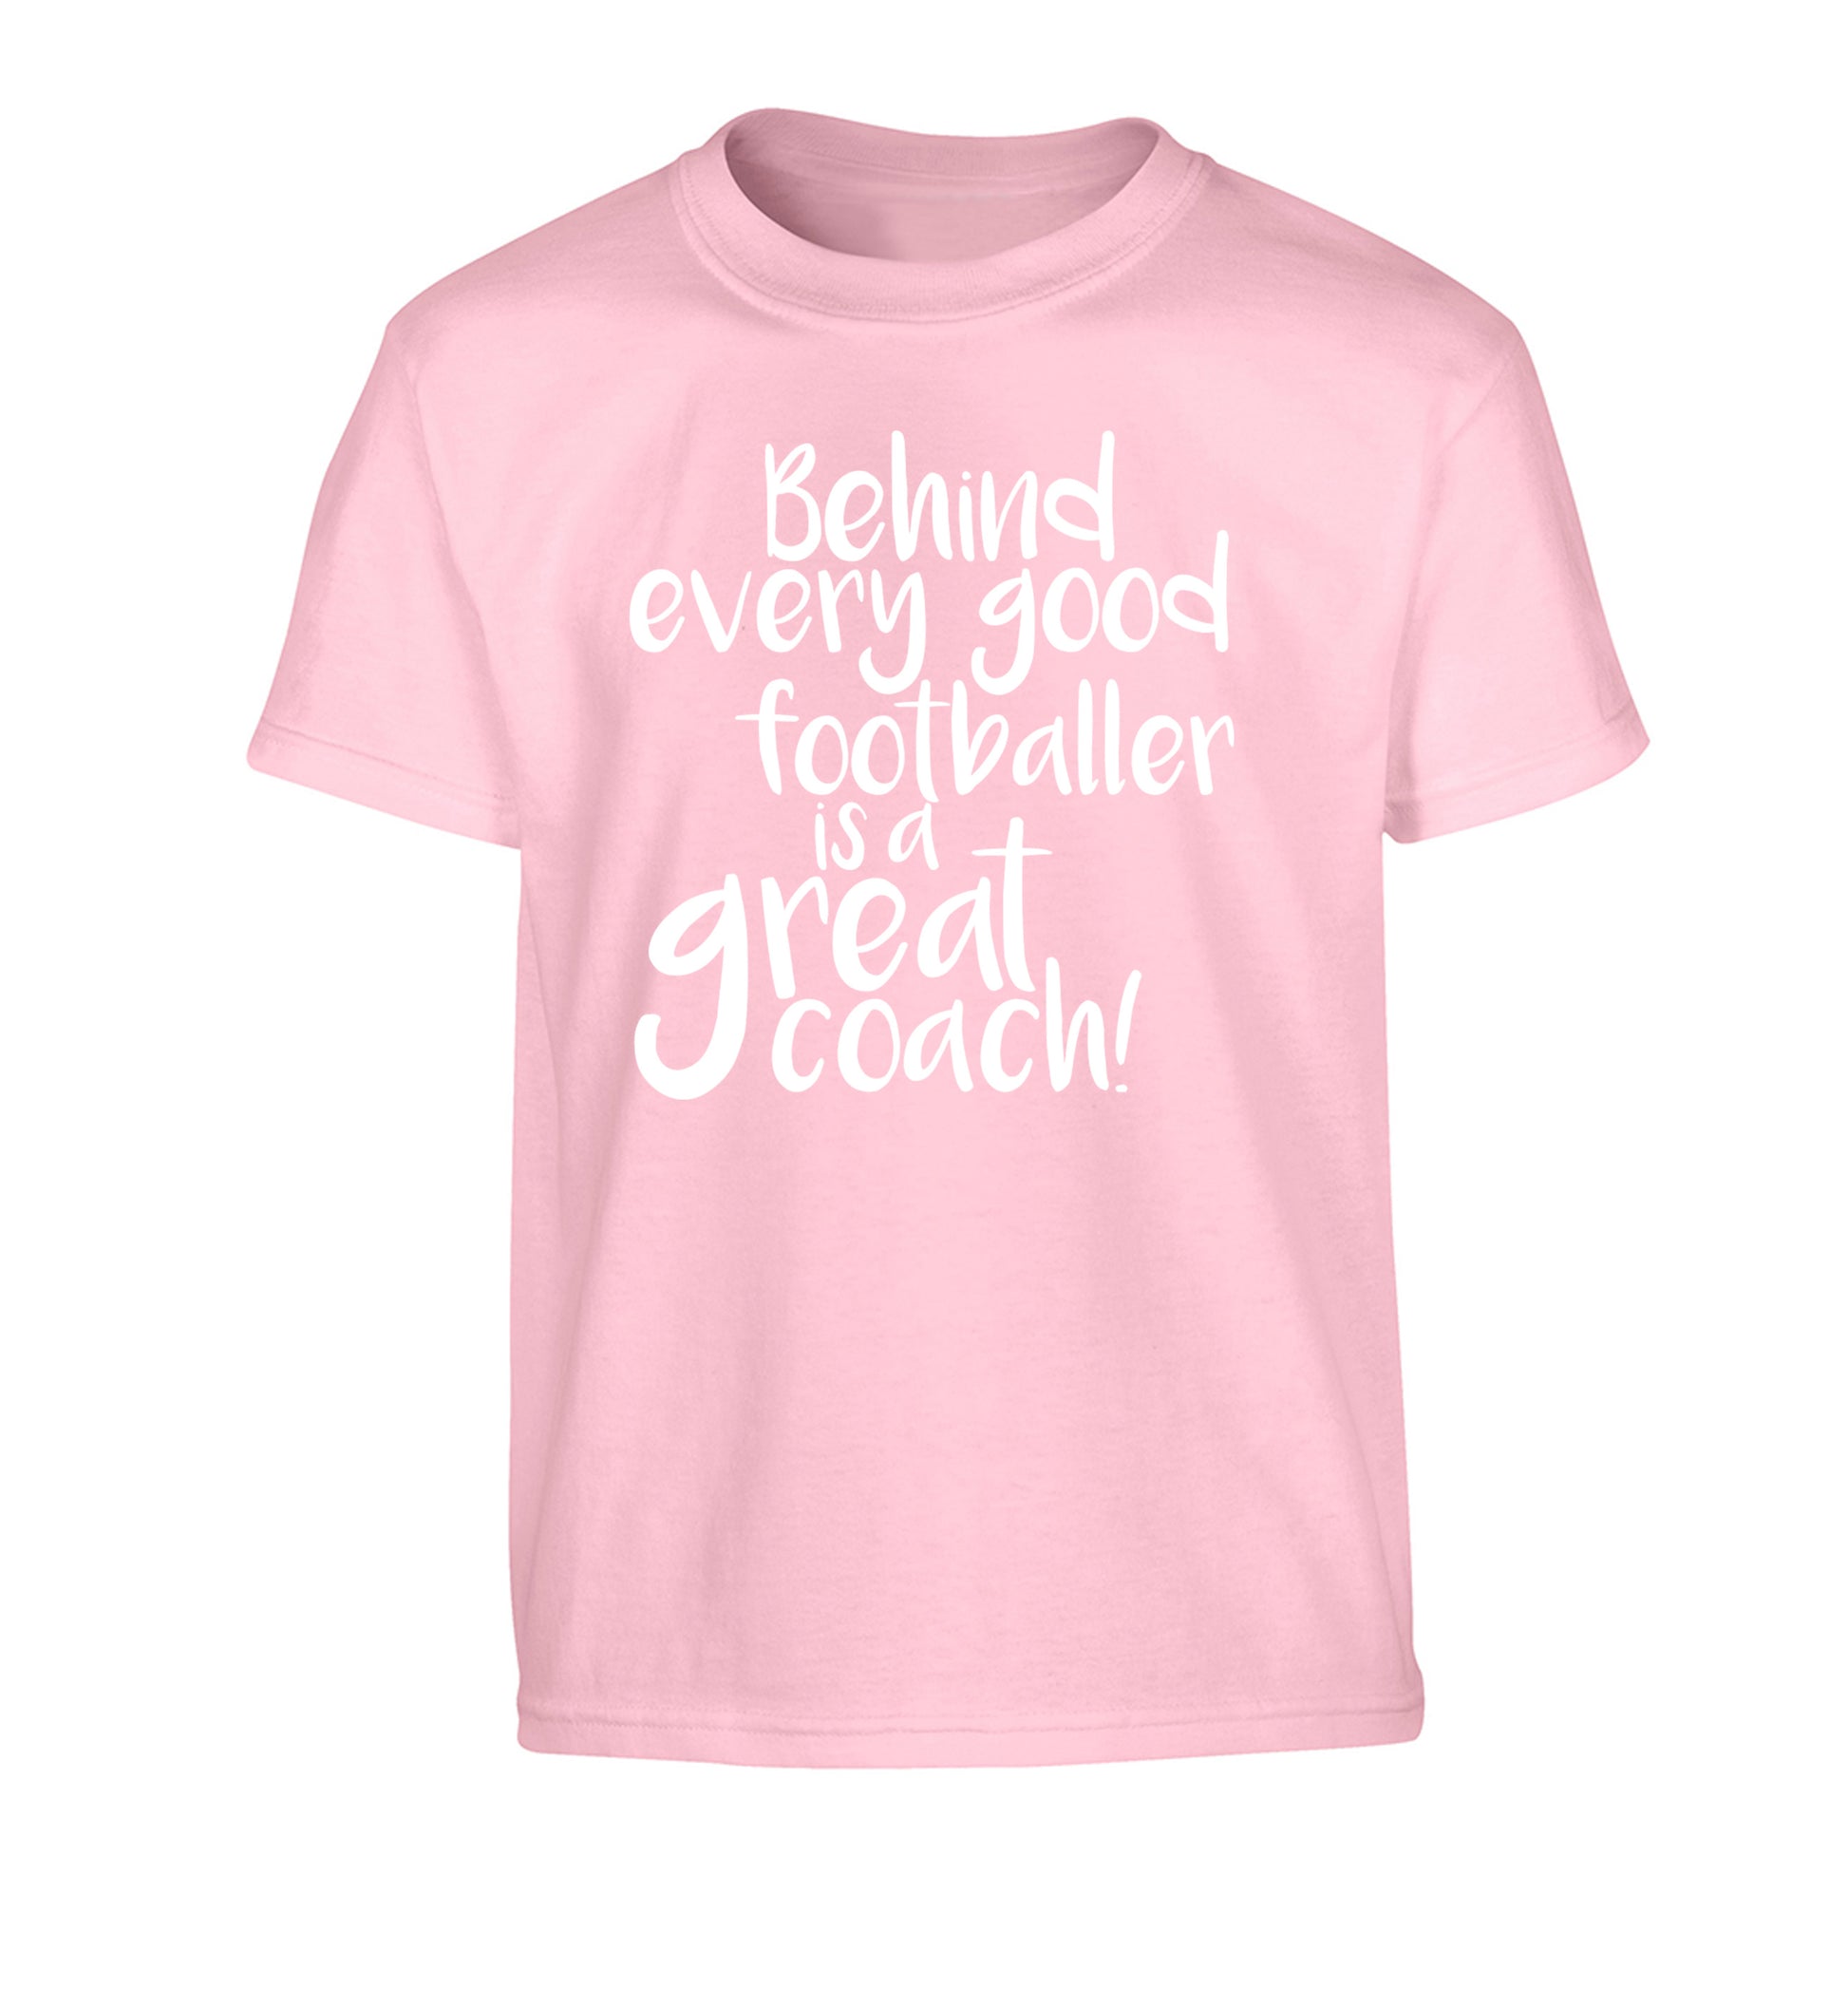 Behind every good footballer is a great coach! Children's light pink Tshirt 12-14 Years